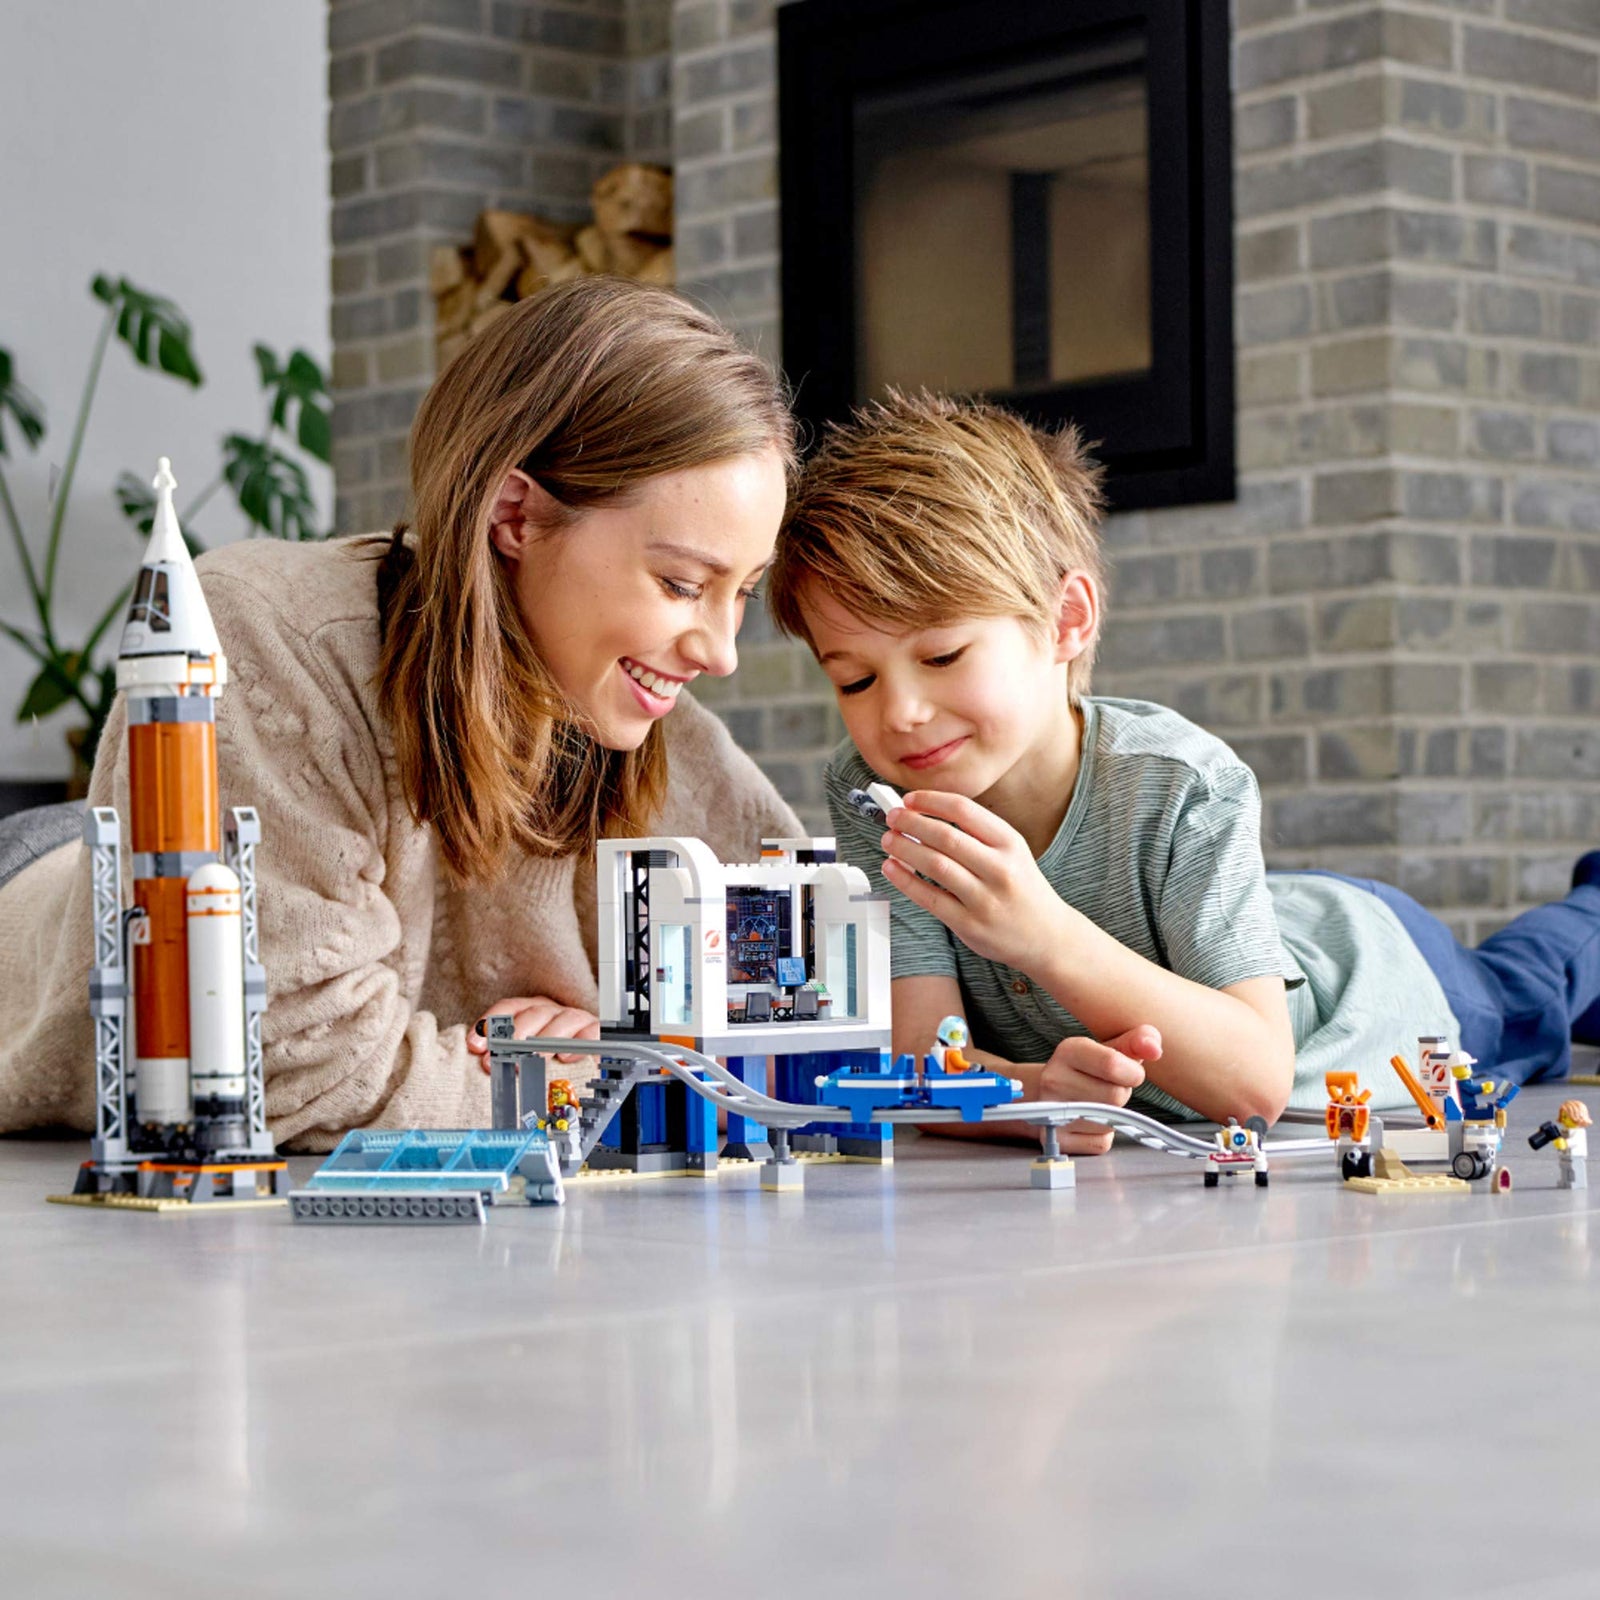 LEGO City Space Deep Space Rocket and Launch Control 60228 Model Rocket Building Kit with Toy Monorail, Control Tower and Astronaut Minifigures, Fun STEM Toy for Creative Play (837 Pieces)